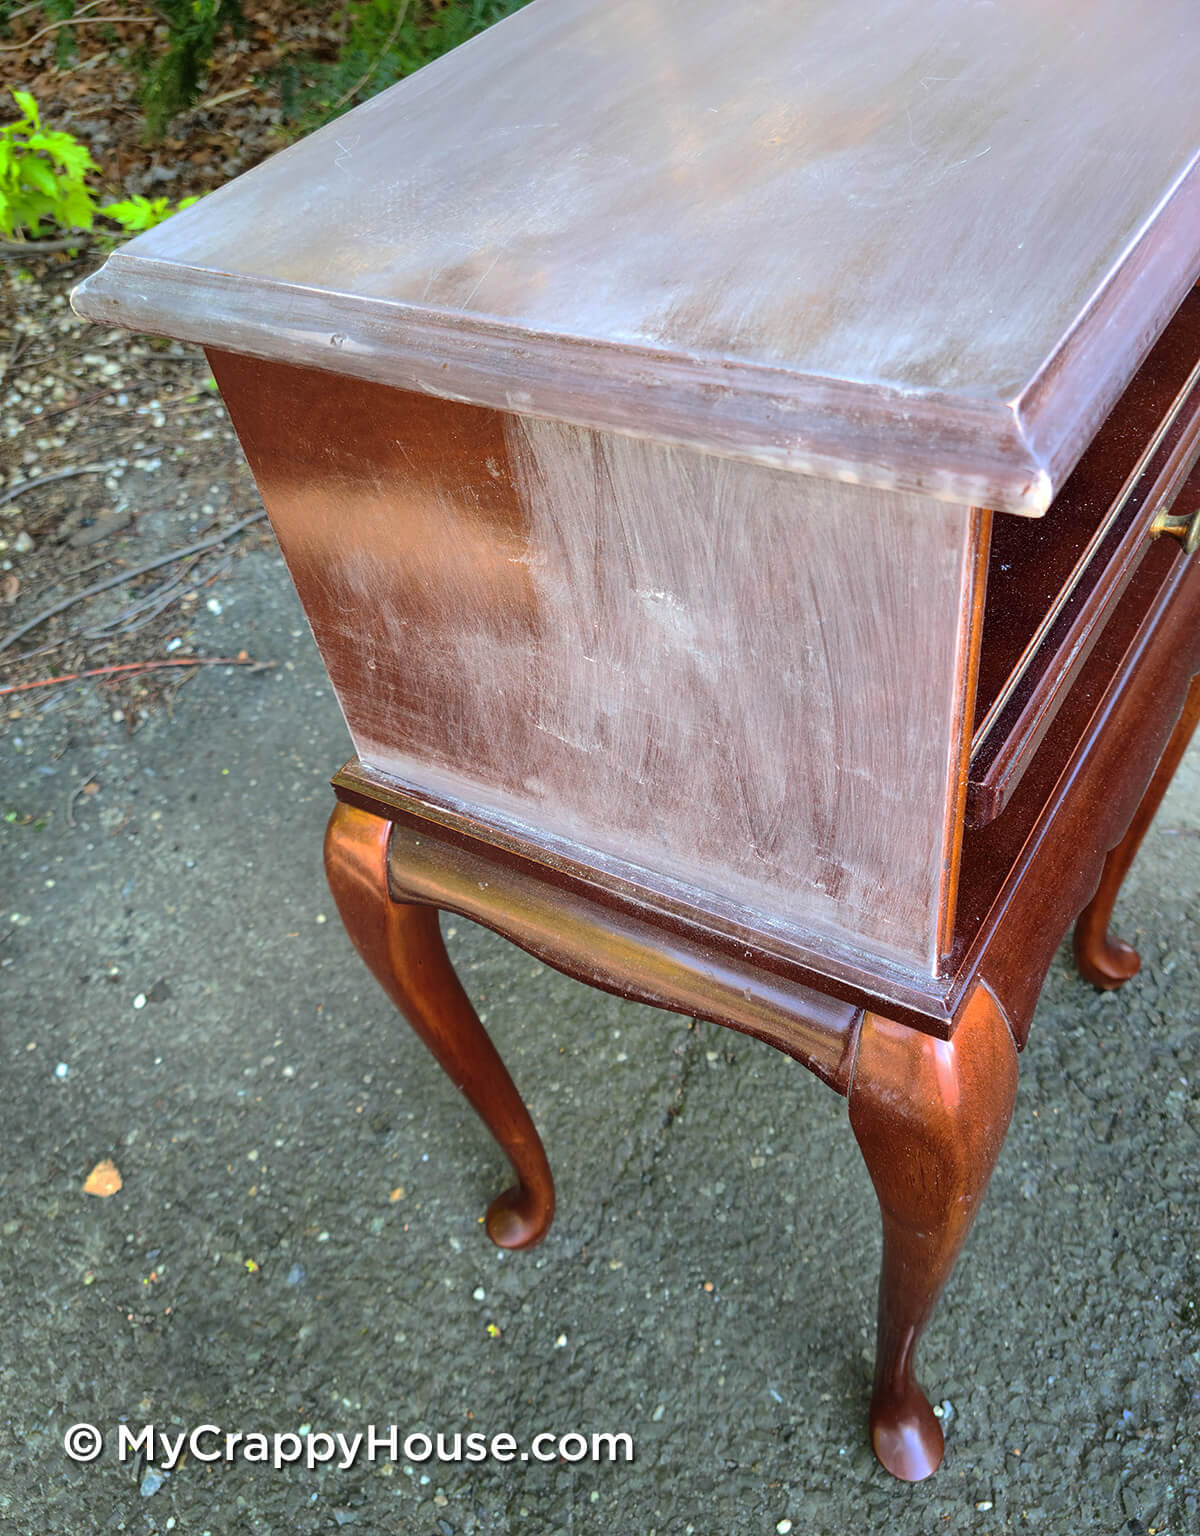 Scuffing factory finish on little side table